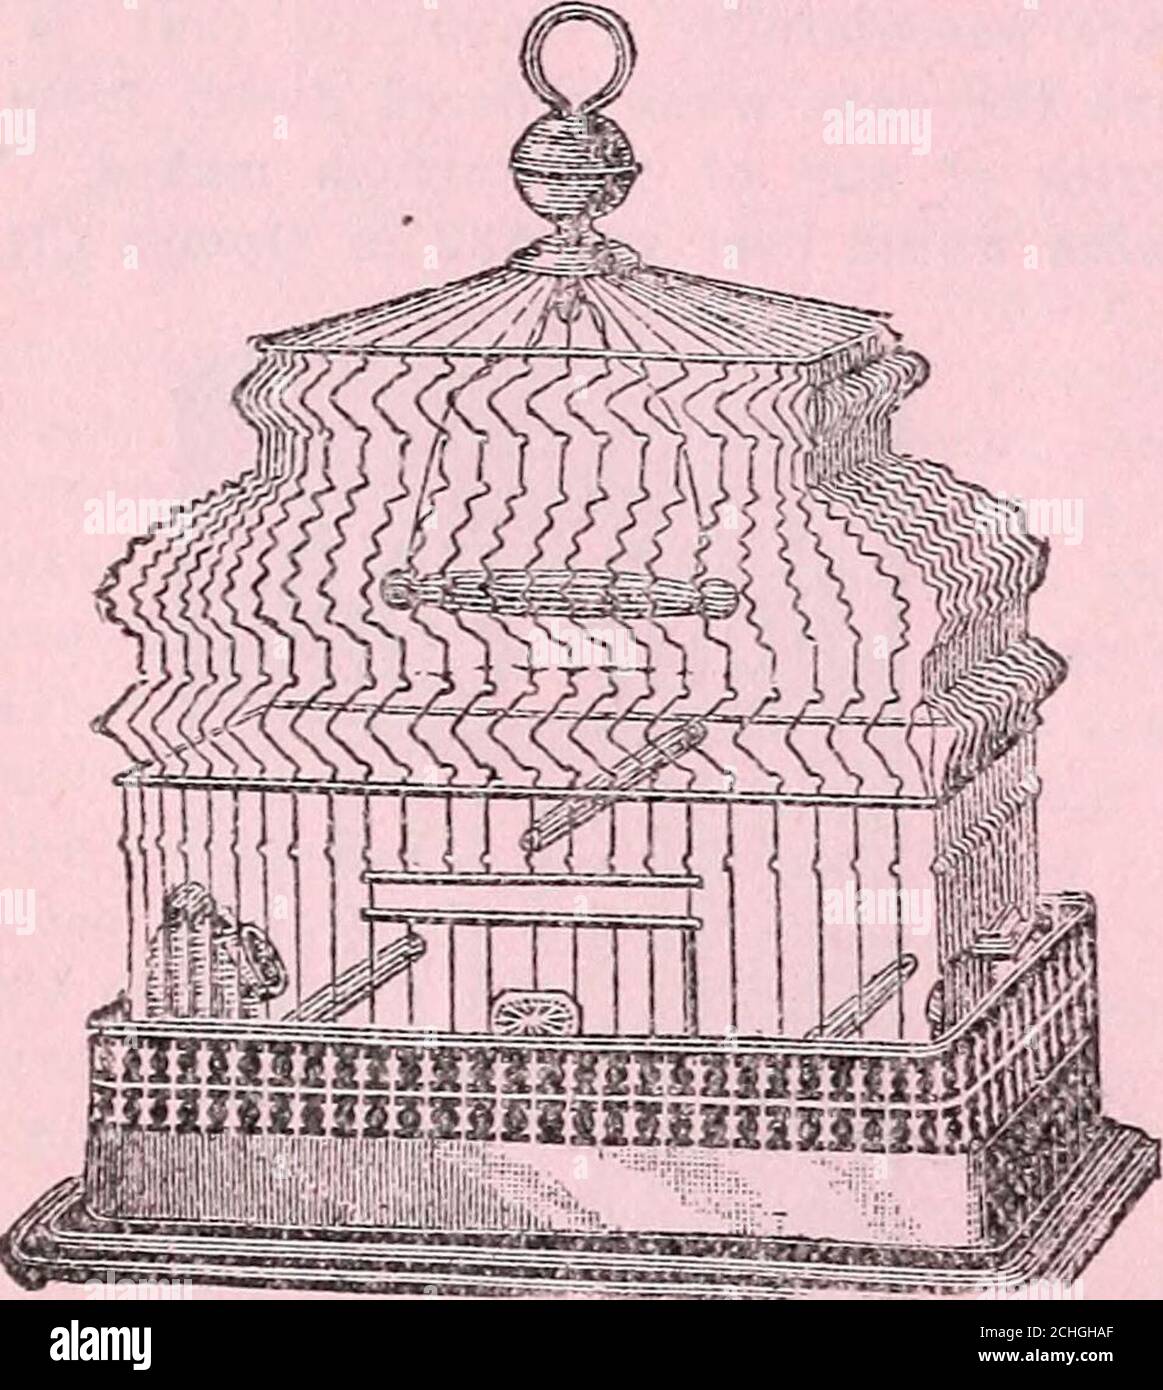 . Steckler's seeds : 1905 . FANCY, EXTRA HEAVY BRASS WIRECANARY CAGES. No. 23. each SI 55 No. 22. each 1 25 No. 24. each 1 75 No. 231, each 1 50 Shield Cups 10 Old Cups 10 D. P. Cups 15 N. B. Brackets 25 Male Canary Birds. Singers 2 75 Females 1 50 Manns NewChicken Fount. Green Bone Cutter. CHICKEN FOUNTS. 1-4 gallon E. H. M. Founts, each So Vo gallon E. H. M. Founts, each 40 1 gallon E. H. M. Founts, each 75 2 gallon E. H. M. Founts, each 1 00 V4 gallon M. L. Founts, each 50 1 gallon M. L. Founts, each 80 % gallon W. R. Founts, each 60 1 gallon W. R. Founts, each 70 2 gallon W. R. Founts, ea Stock Photo